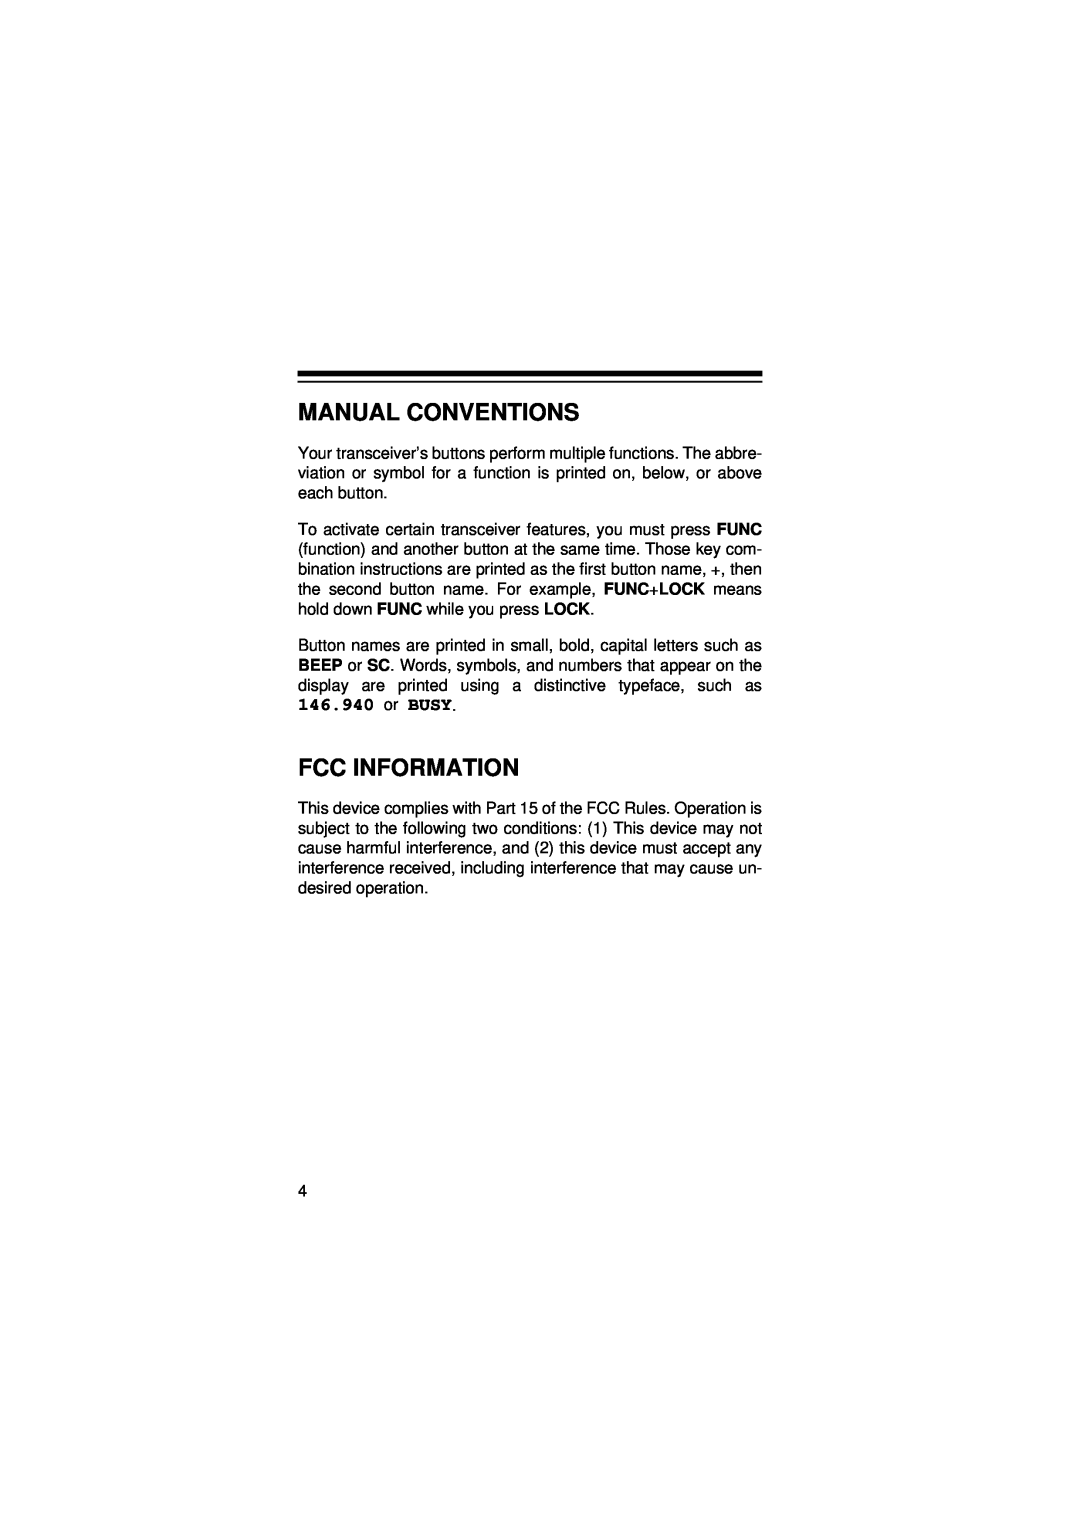 Radio Shack HTX-200 owner manual Manual Conventions, Fcc Information 